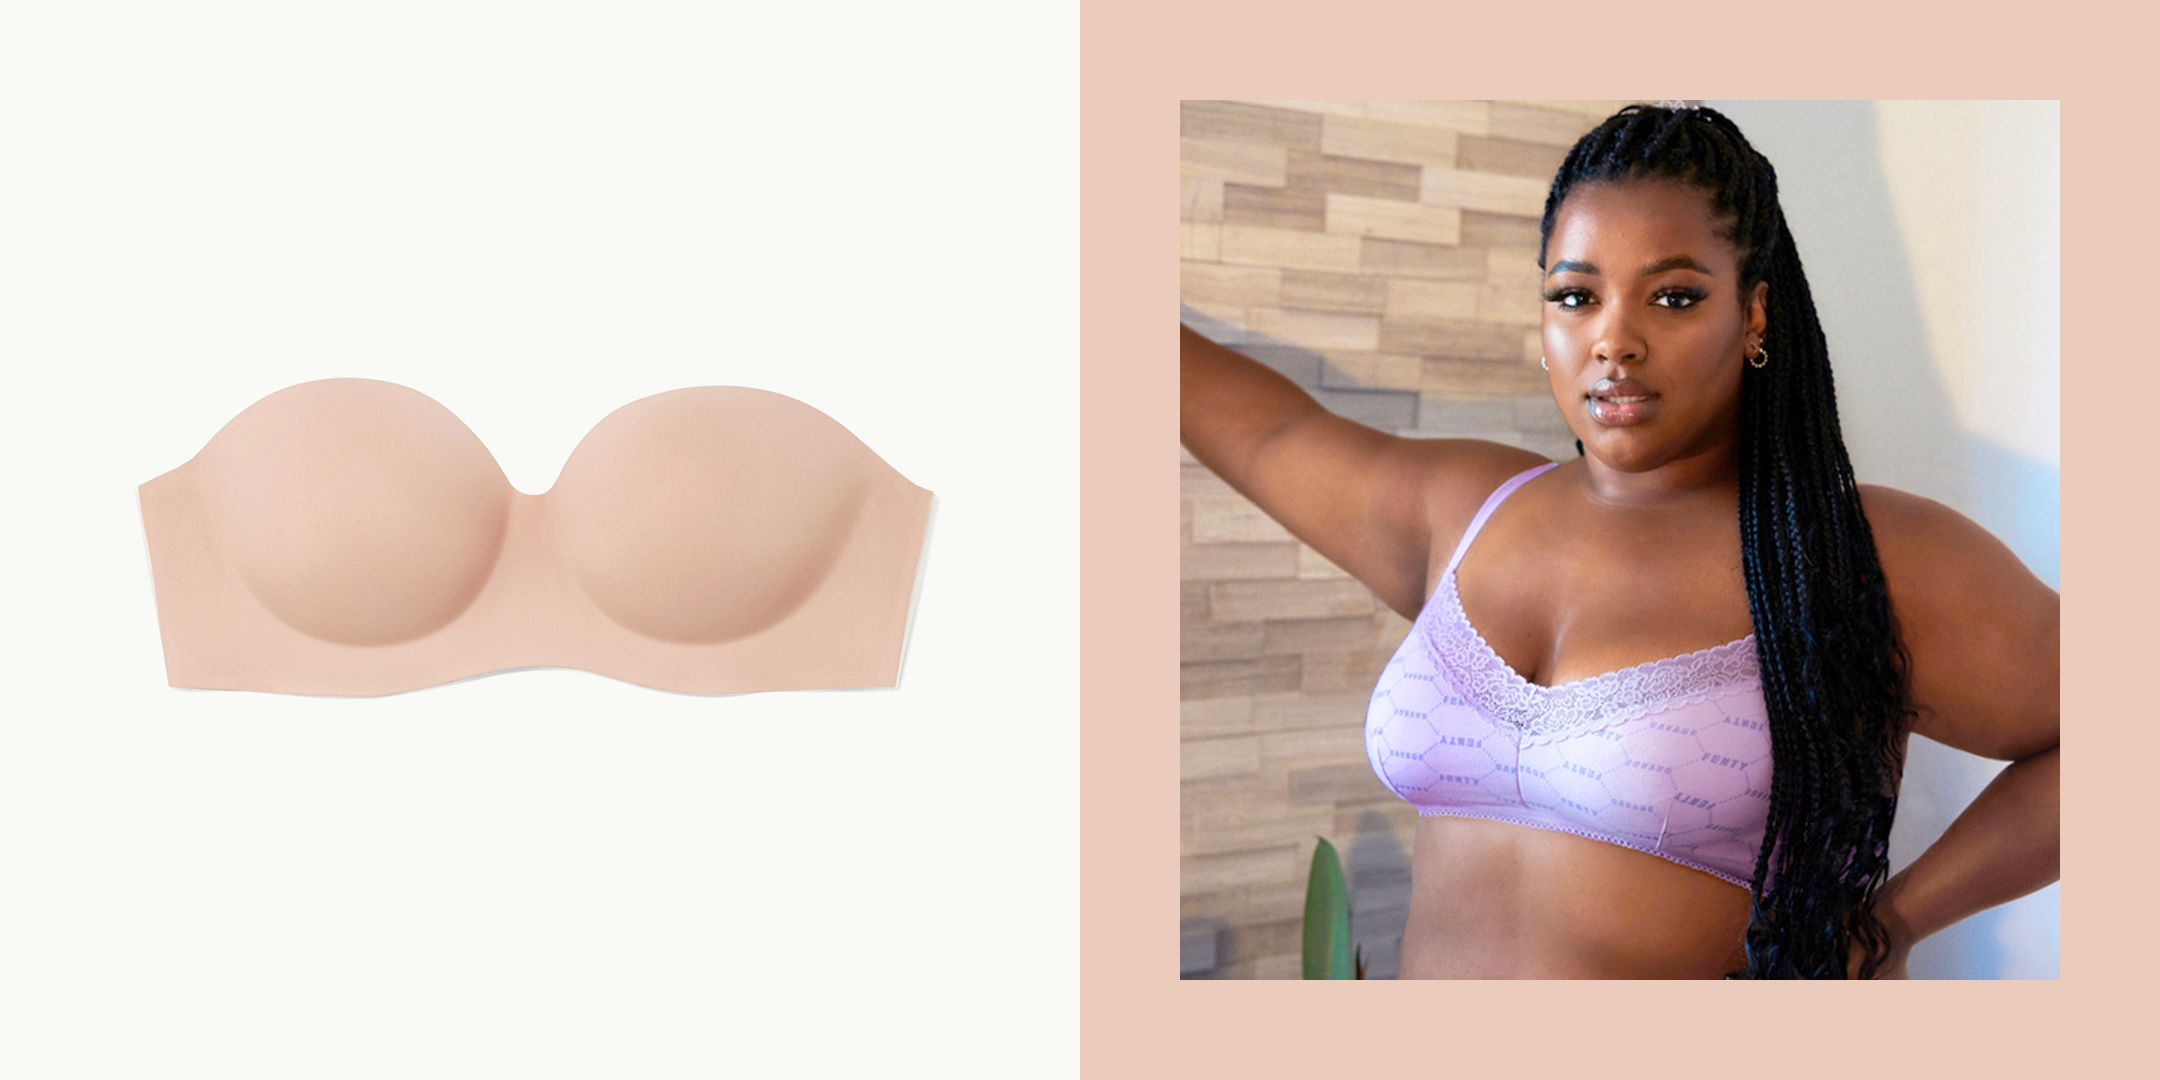 Shop All Types Of Bras